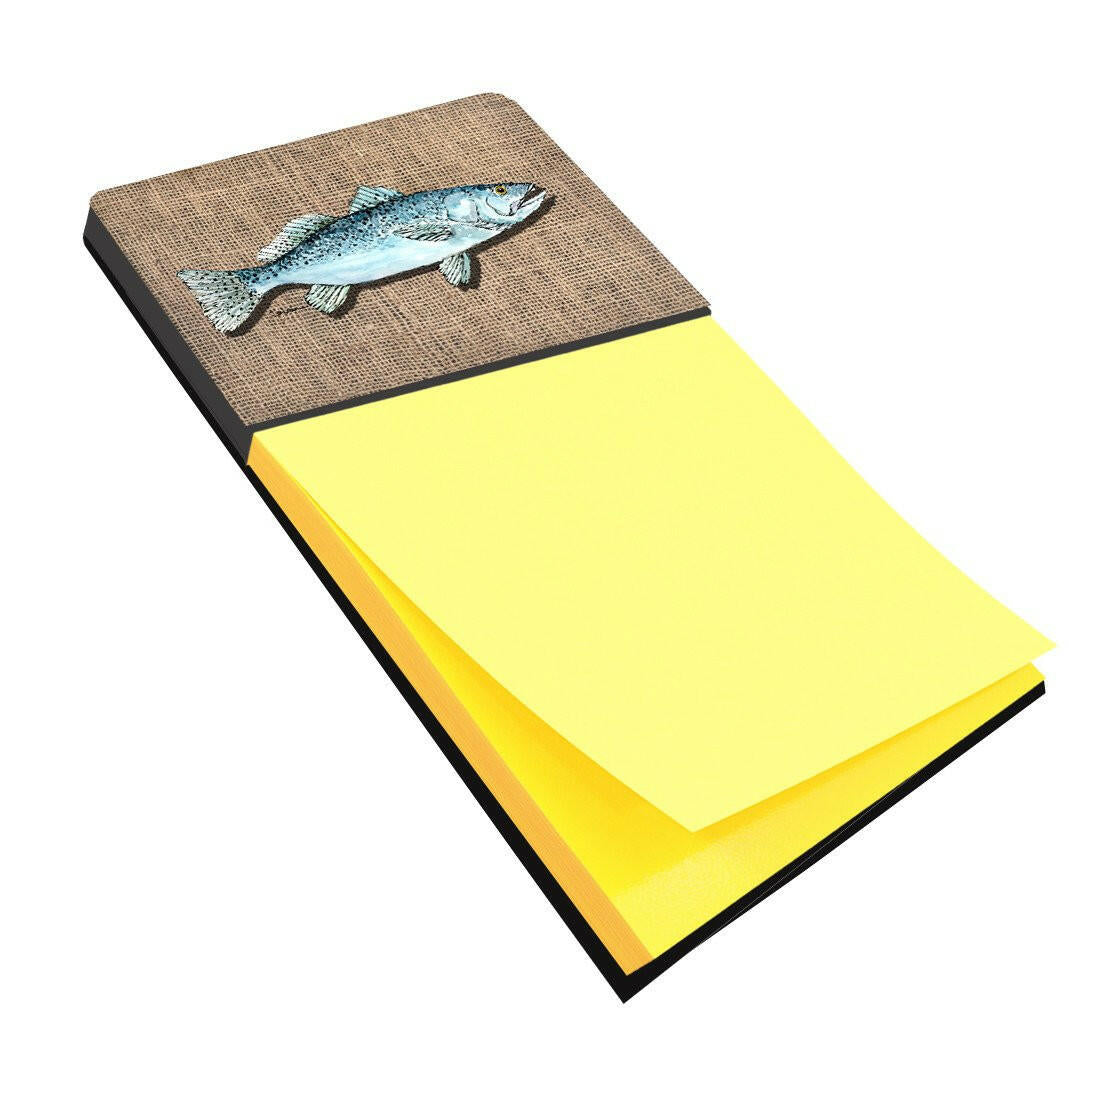 Fish Speckled Trout Refiillable Sticky Note Holder or Postit Note Dispenser 8737SN by Caroline's Treasures